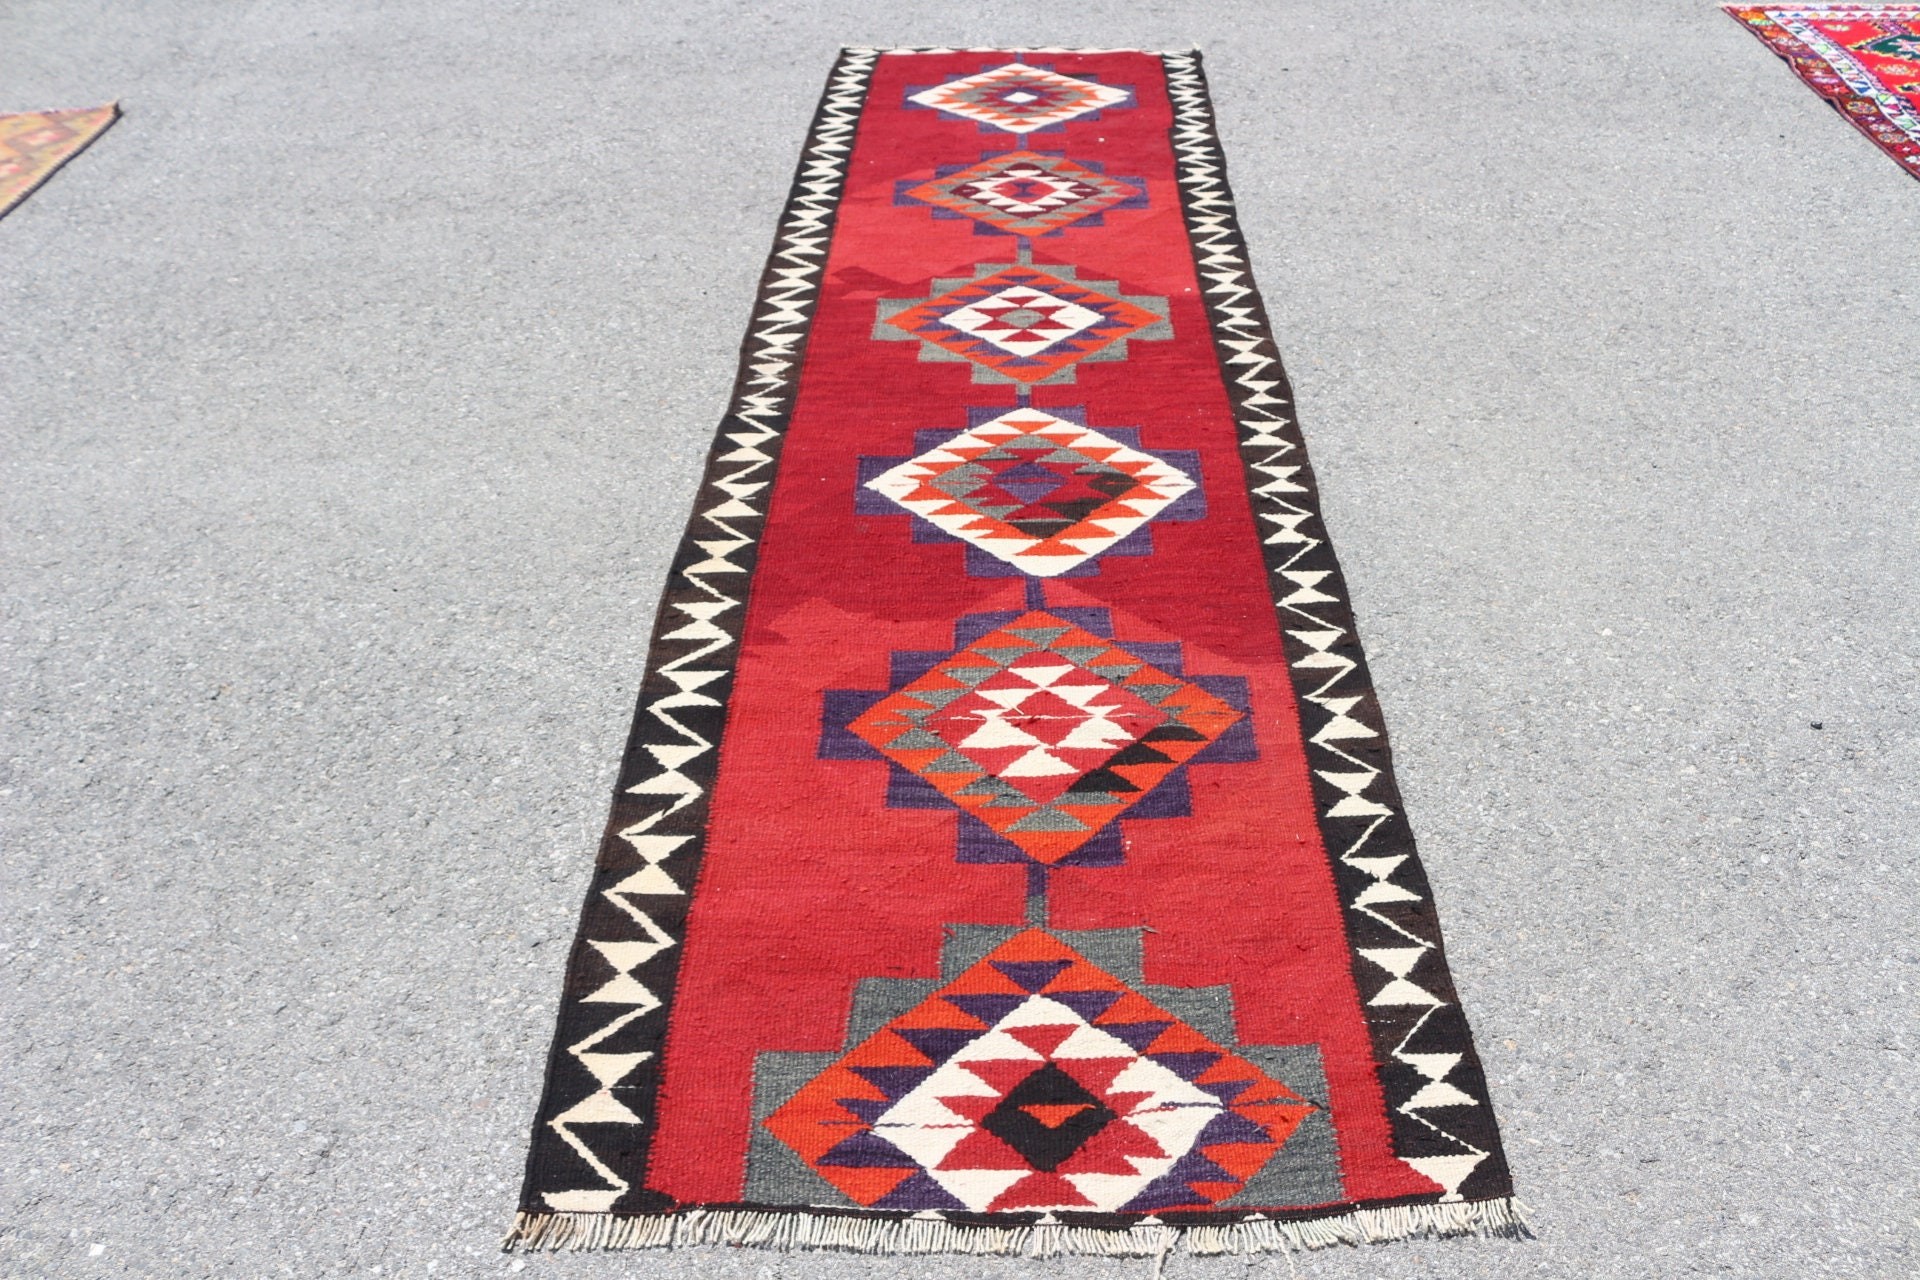 Moroccan Rugs, Vintage Rugs, Kitchen Rug, 3.1x11 ft Runner Rug, Turkish Rug, Hallway Rug, Stair Rugs, Red Anatolian Rugs, Rugs for Kitchen